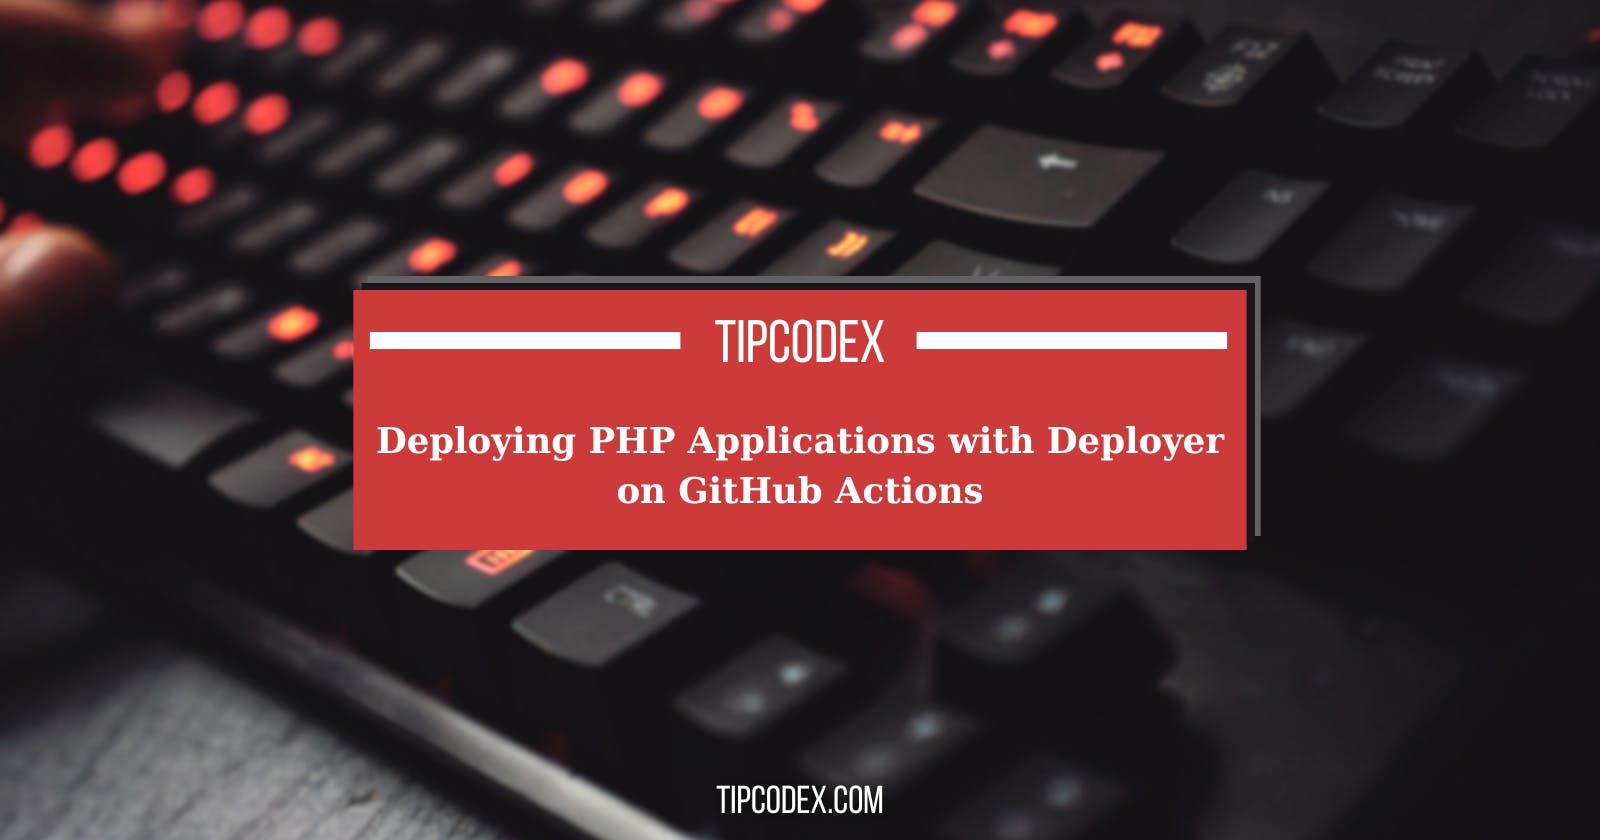 Deploying PHP Applications with Deployer on GitHub Actions